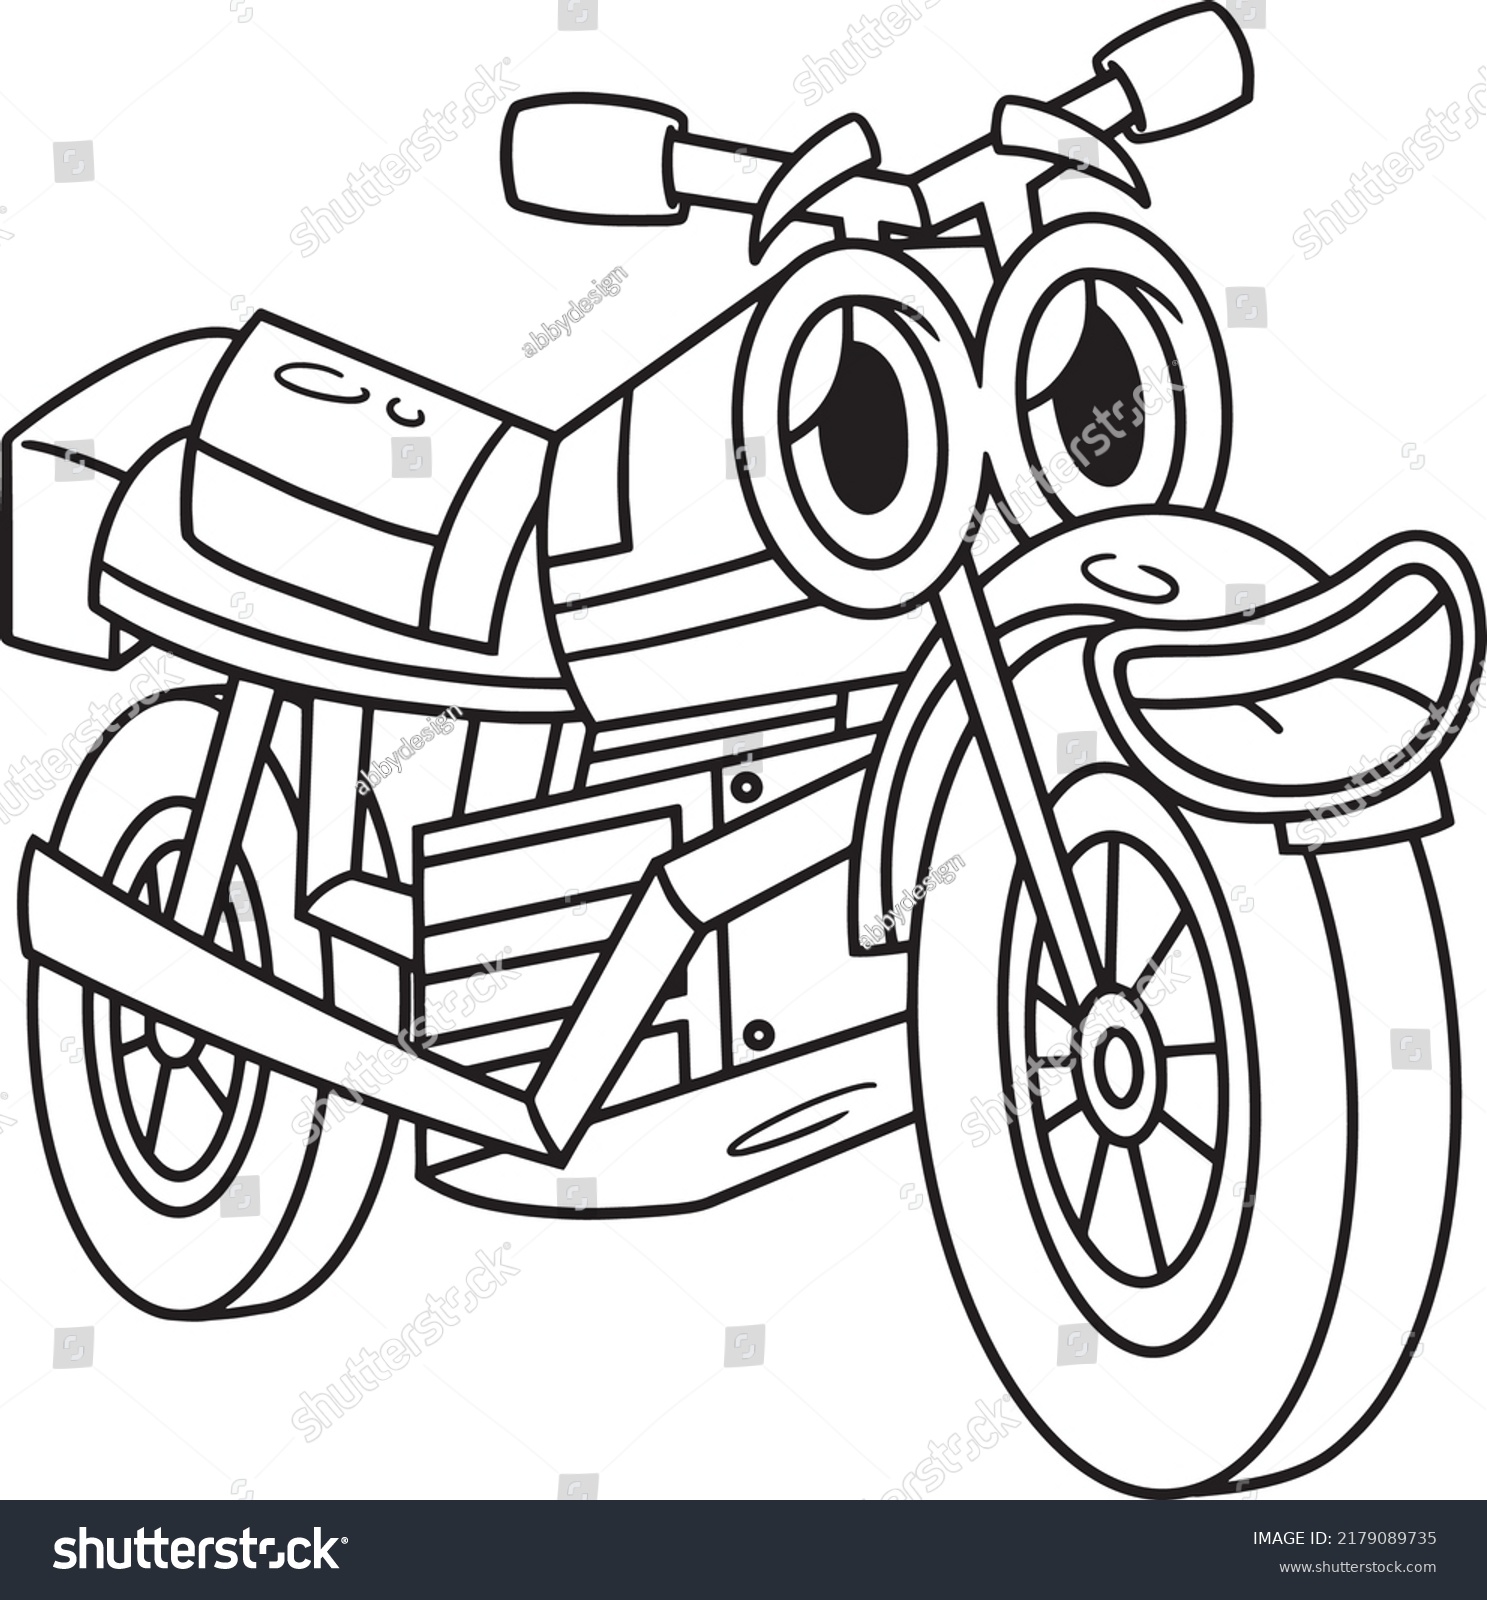 Motorcycle Face Vehicle Coloring Page Stock Vector (Royalty Free ...